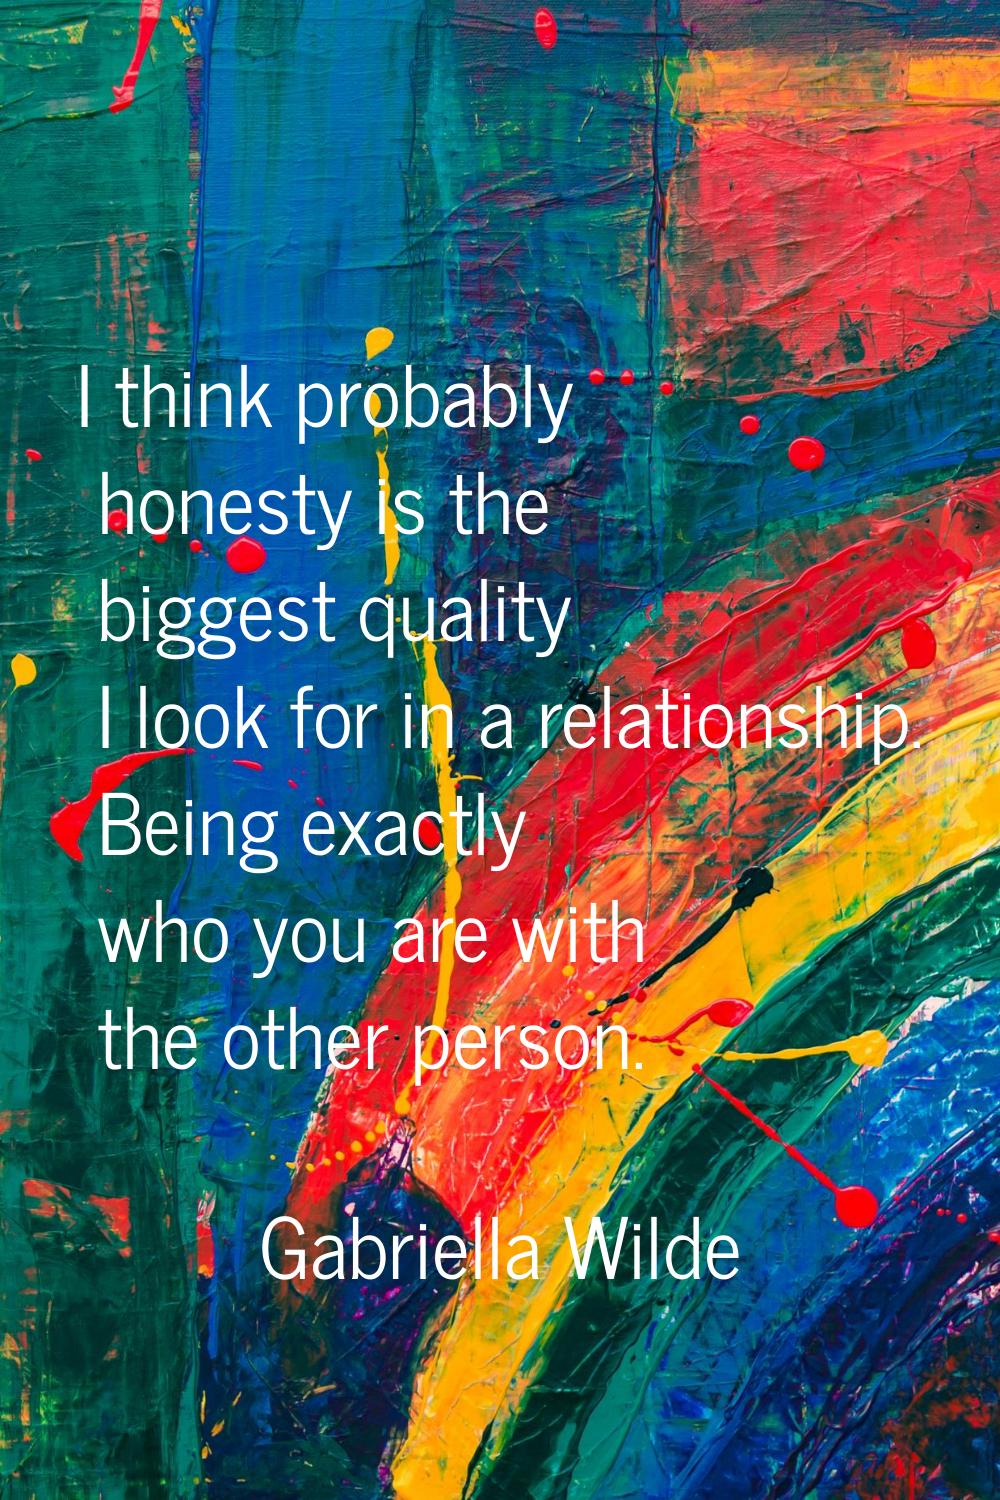 I think probably honesty is the biggest quality I look for in a relationship. Being exactly who you